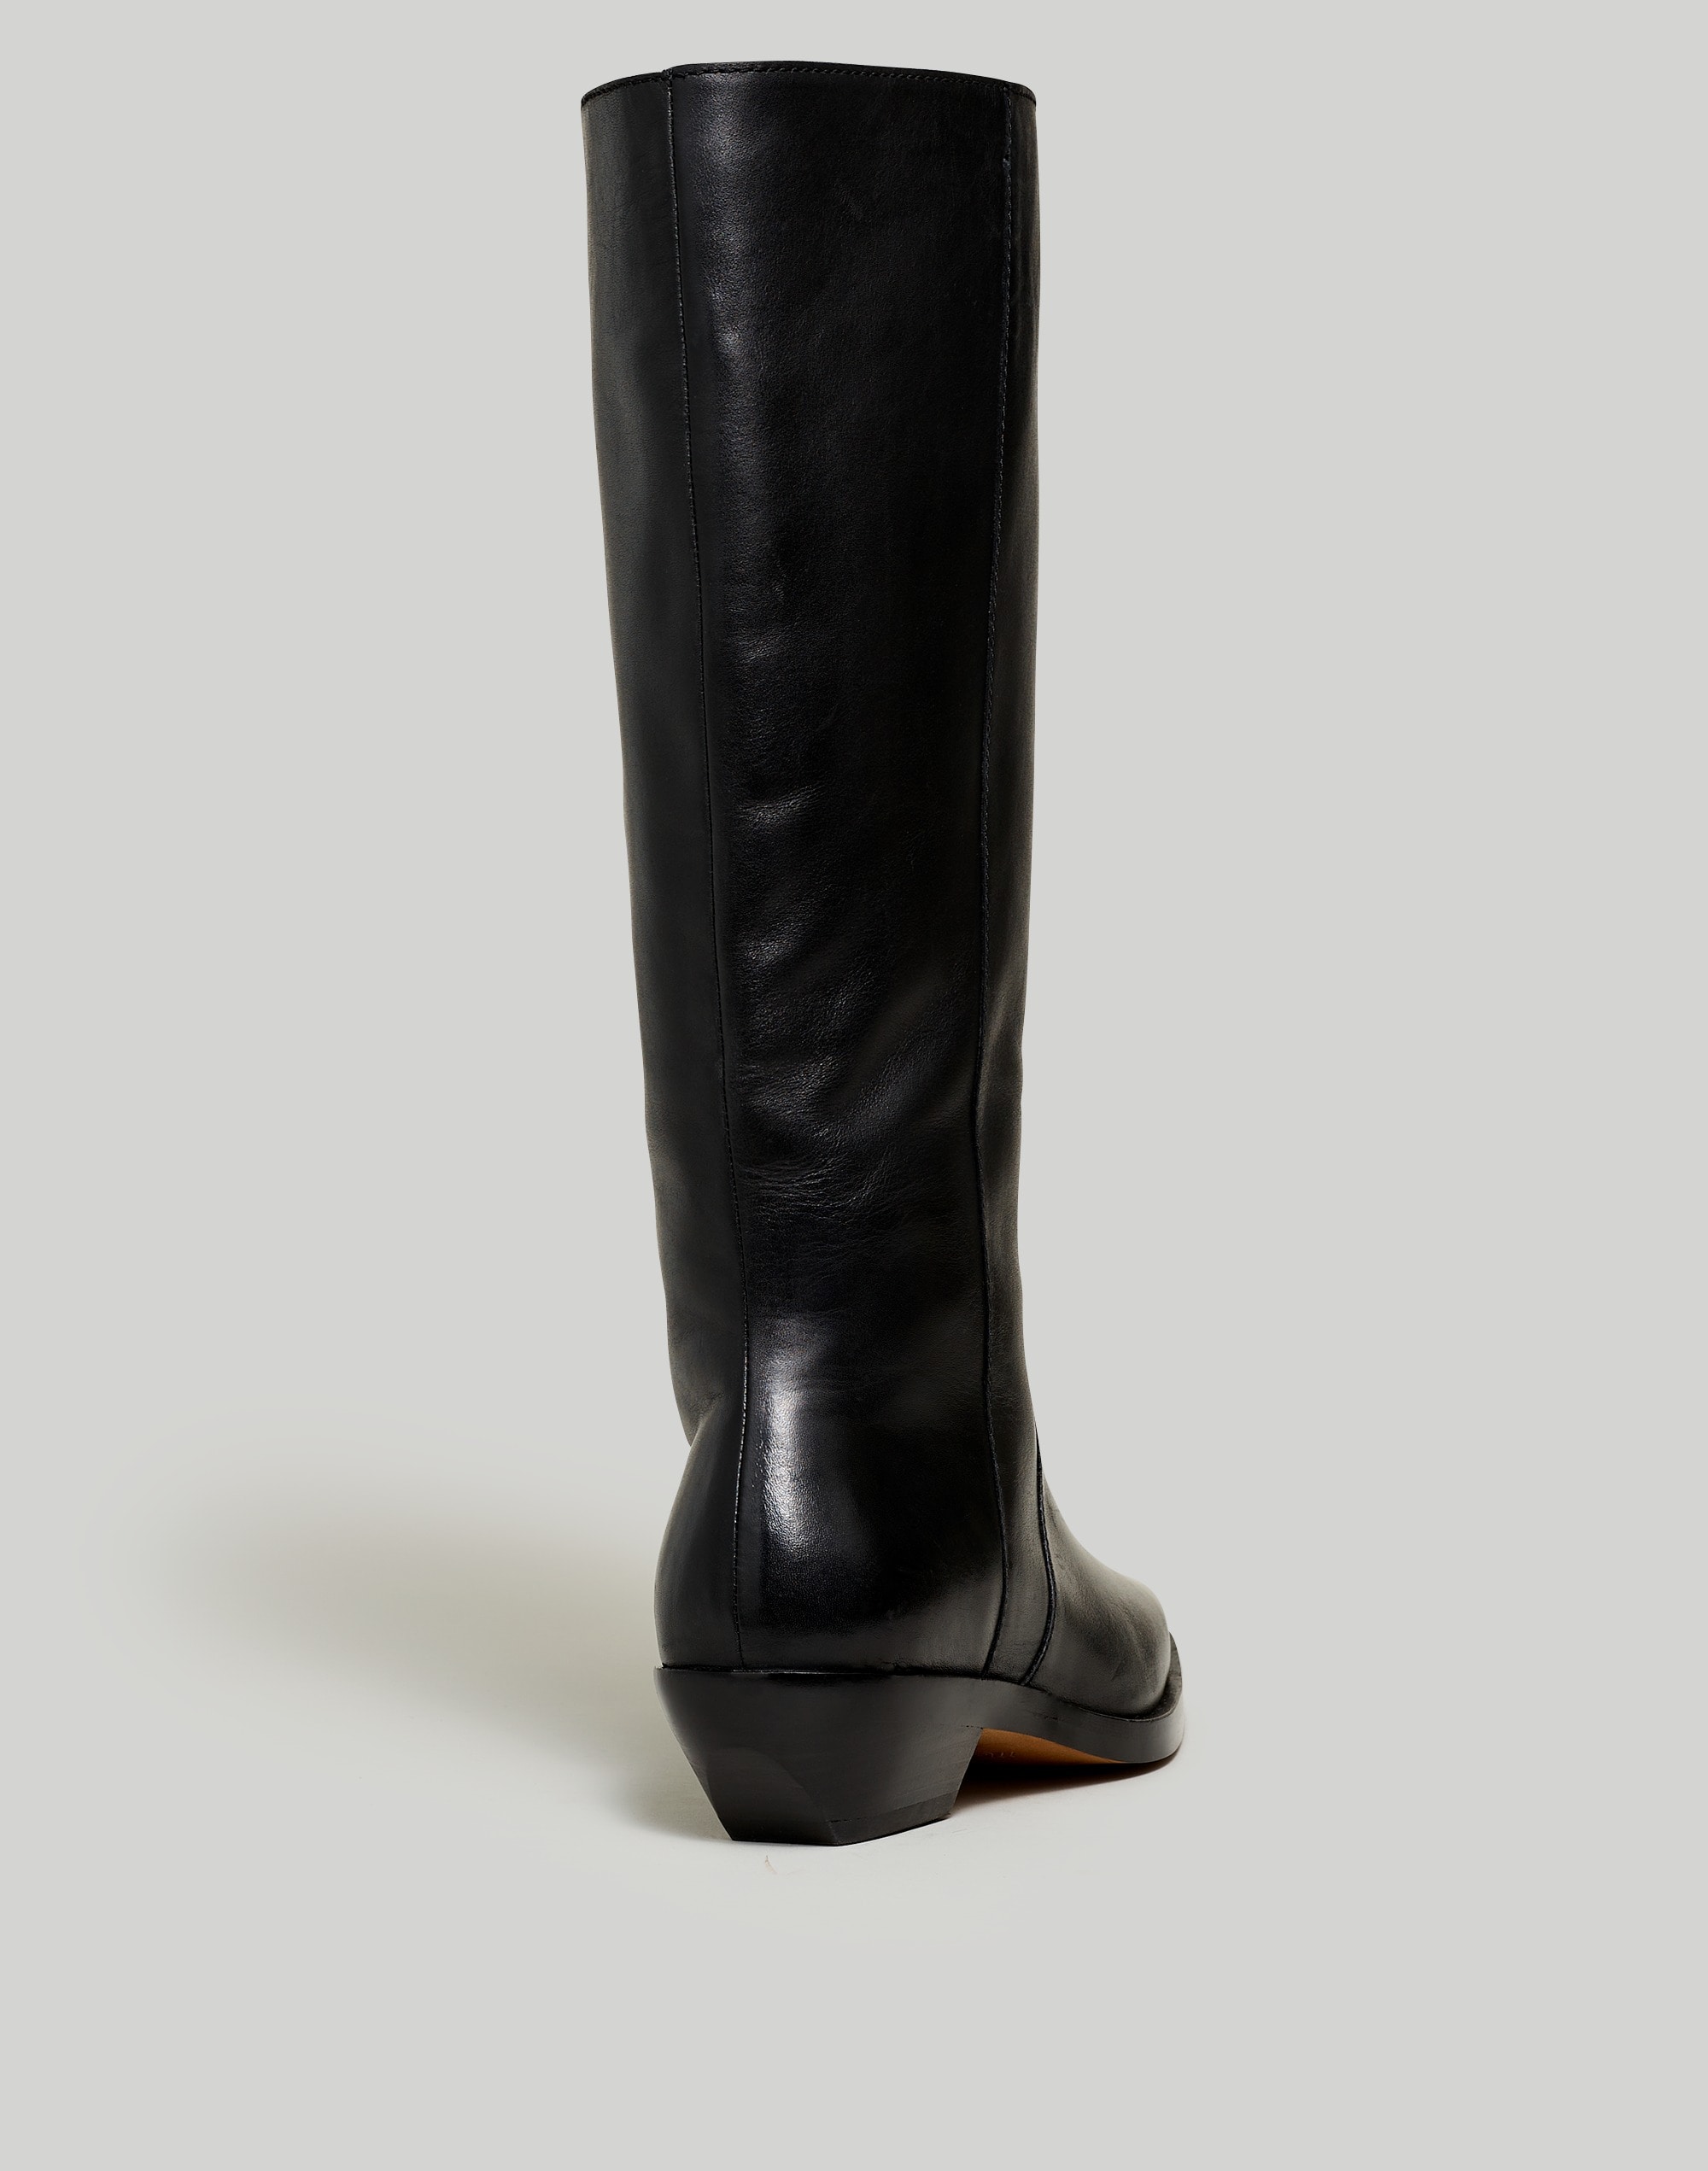 The Antoine Tall Boot with Extended Calf Leather